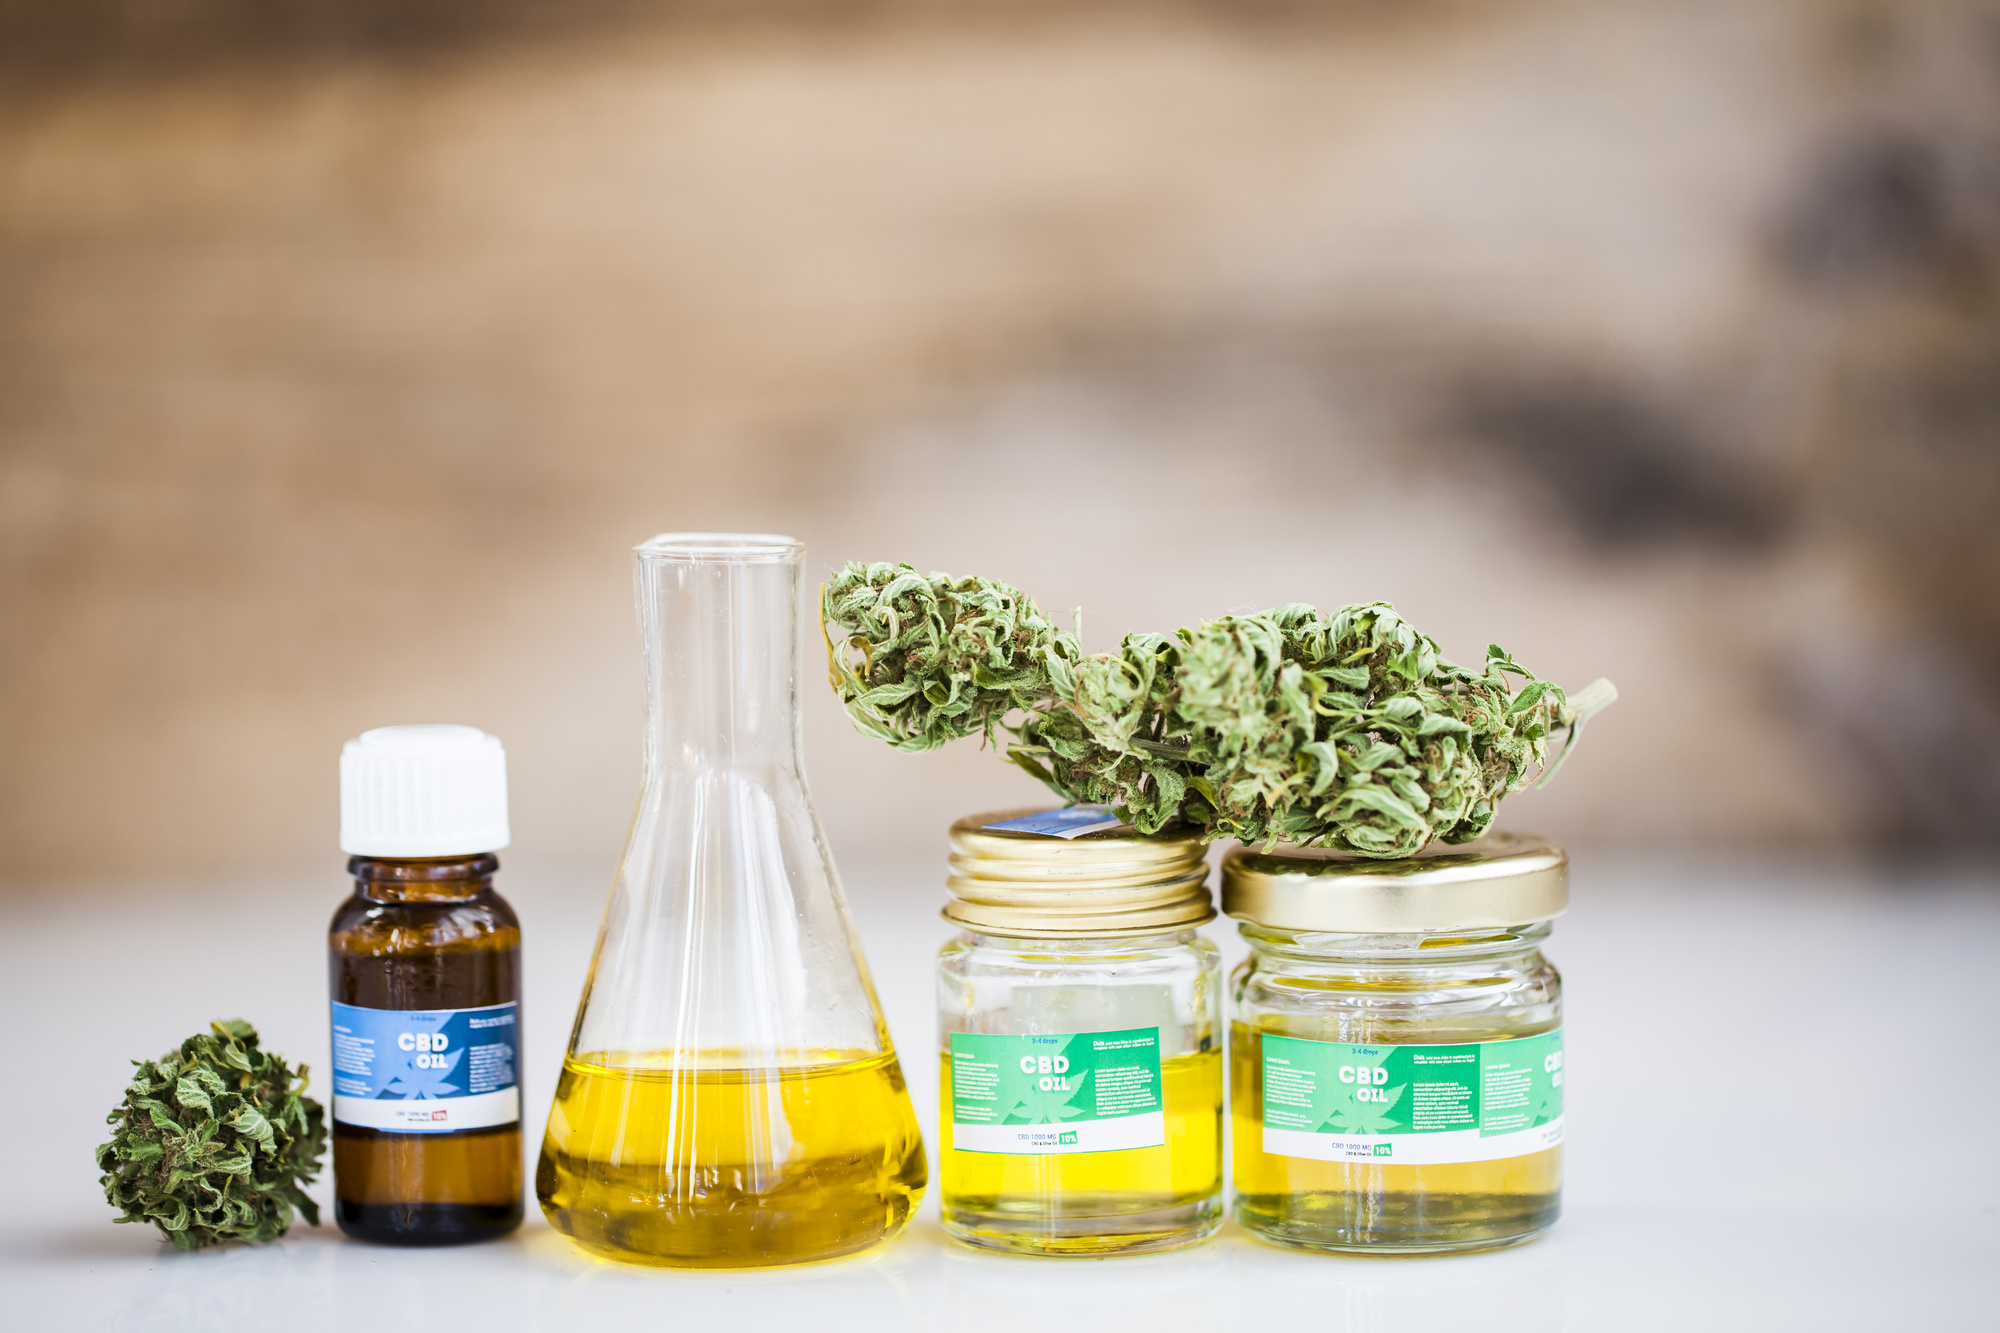 What Are The Simplest CBD Merchandise?